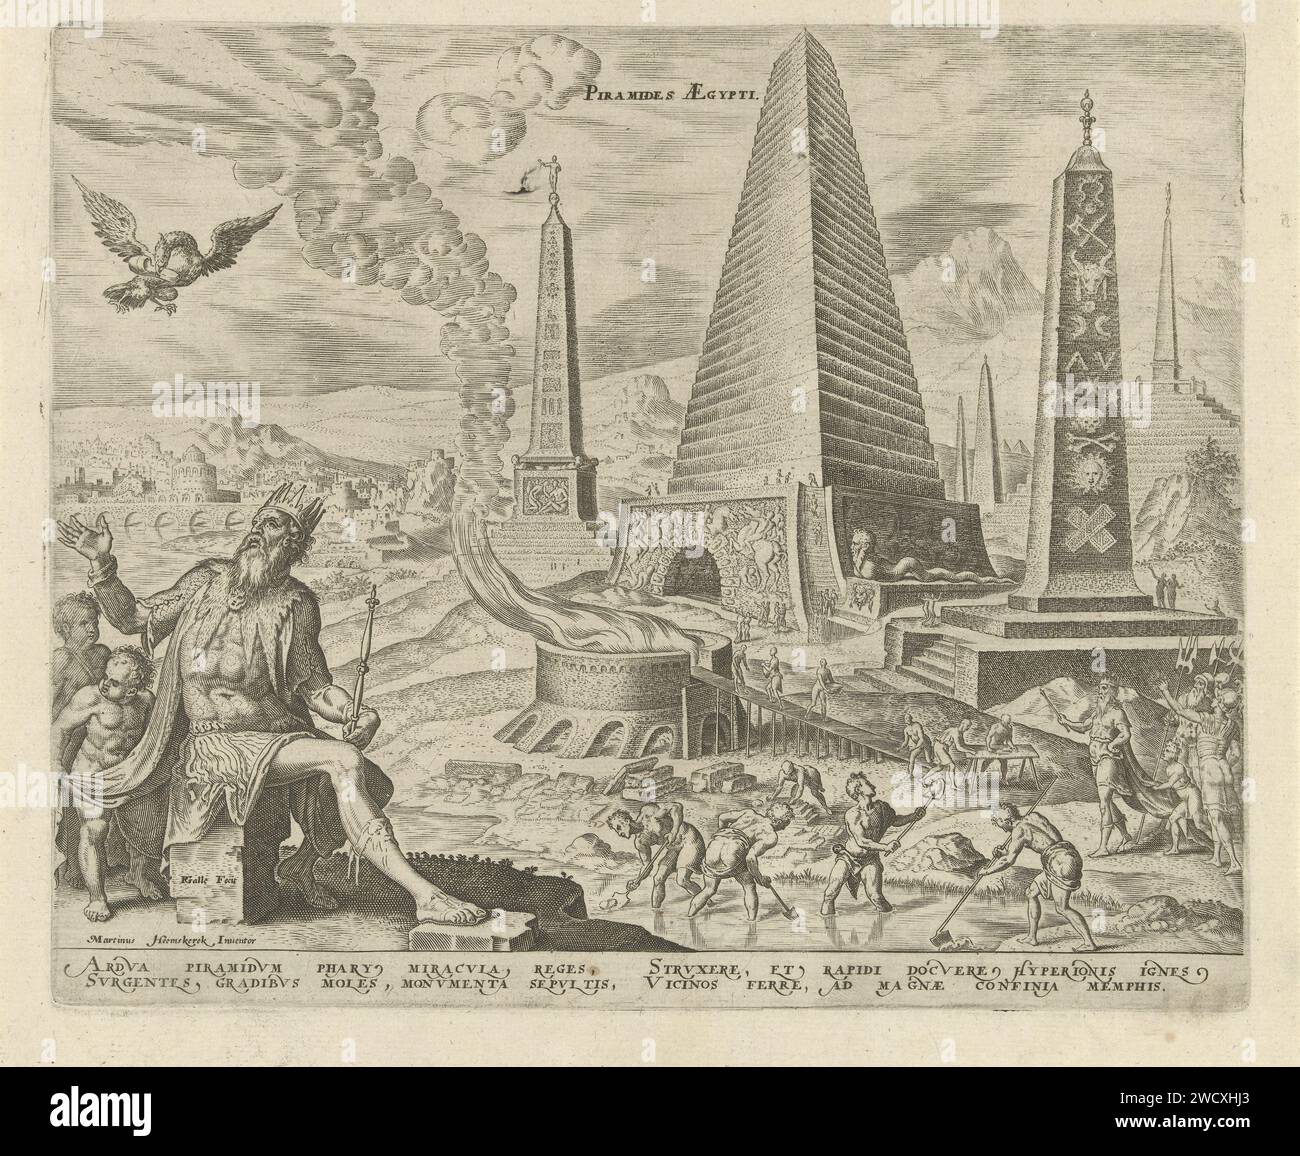 Pyramids of Egypt, Philips Galle, After Maarten van Heemskerck, 1572 print In the background Egyptian pyramids and obelisks. Men made to slave scoop clay from the river, which are then baked into stones in a burning oven for the buildings. In the foreground, Pharaoh Psammetiches is on a stone block. He looks at an eagle with a sandal in his mouth. This image refers to a fable of Aesopus about the relationship between Rhodopis, a young Egyptian woman, and the Pharaoh. The print has a Latin caption and is part of a series about the eight wonders of the world. print maker: Antwerpafter design by: Stock Photo